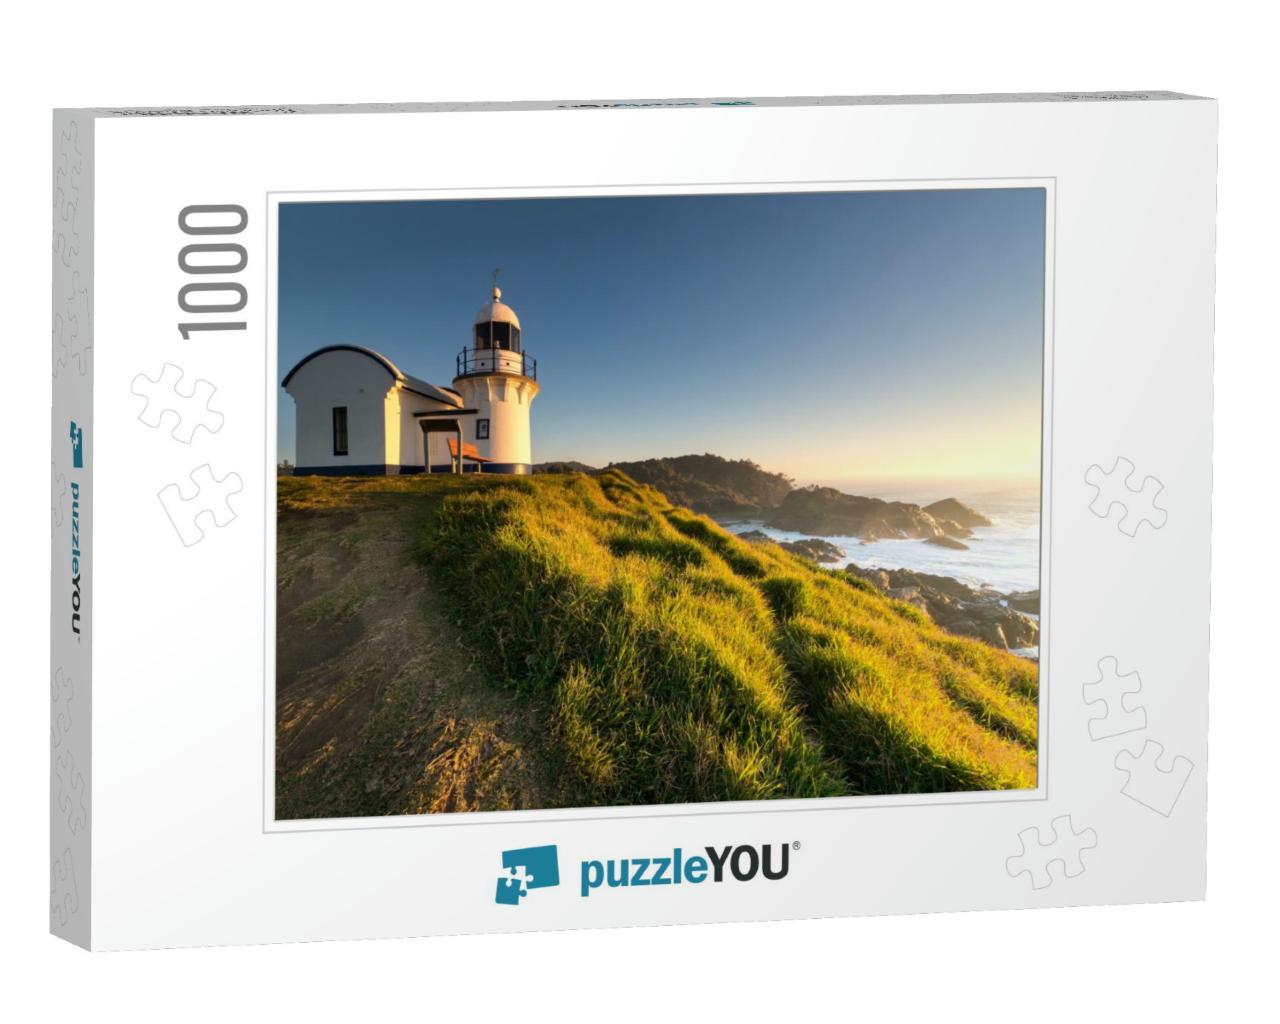 Morning Sunrise At the Tacking Point Lighthouse At Port M... Jigsaw Puzzle with 1000 pieces